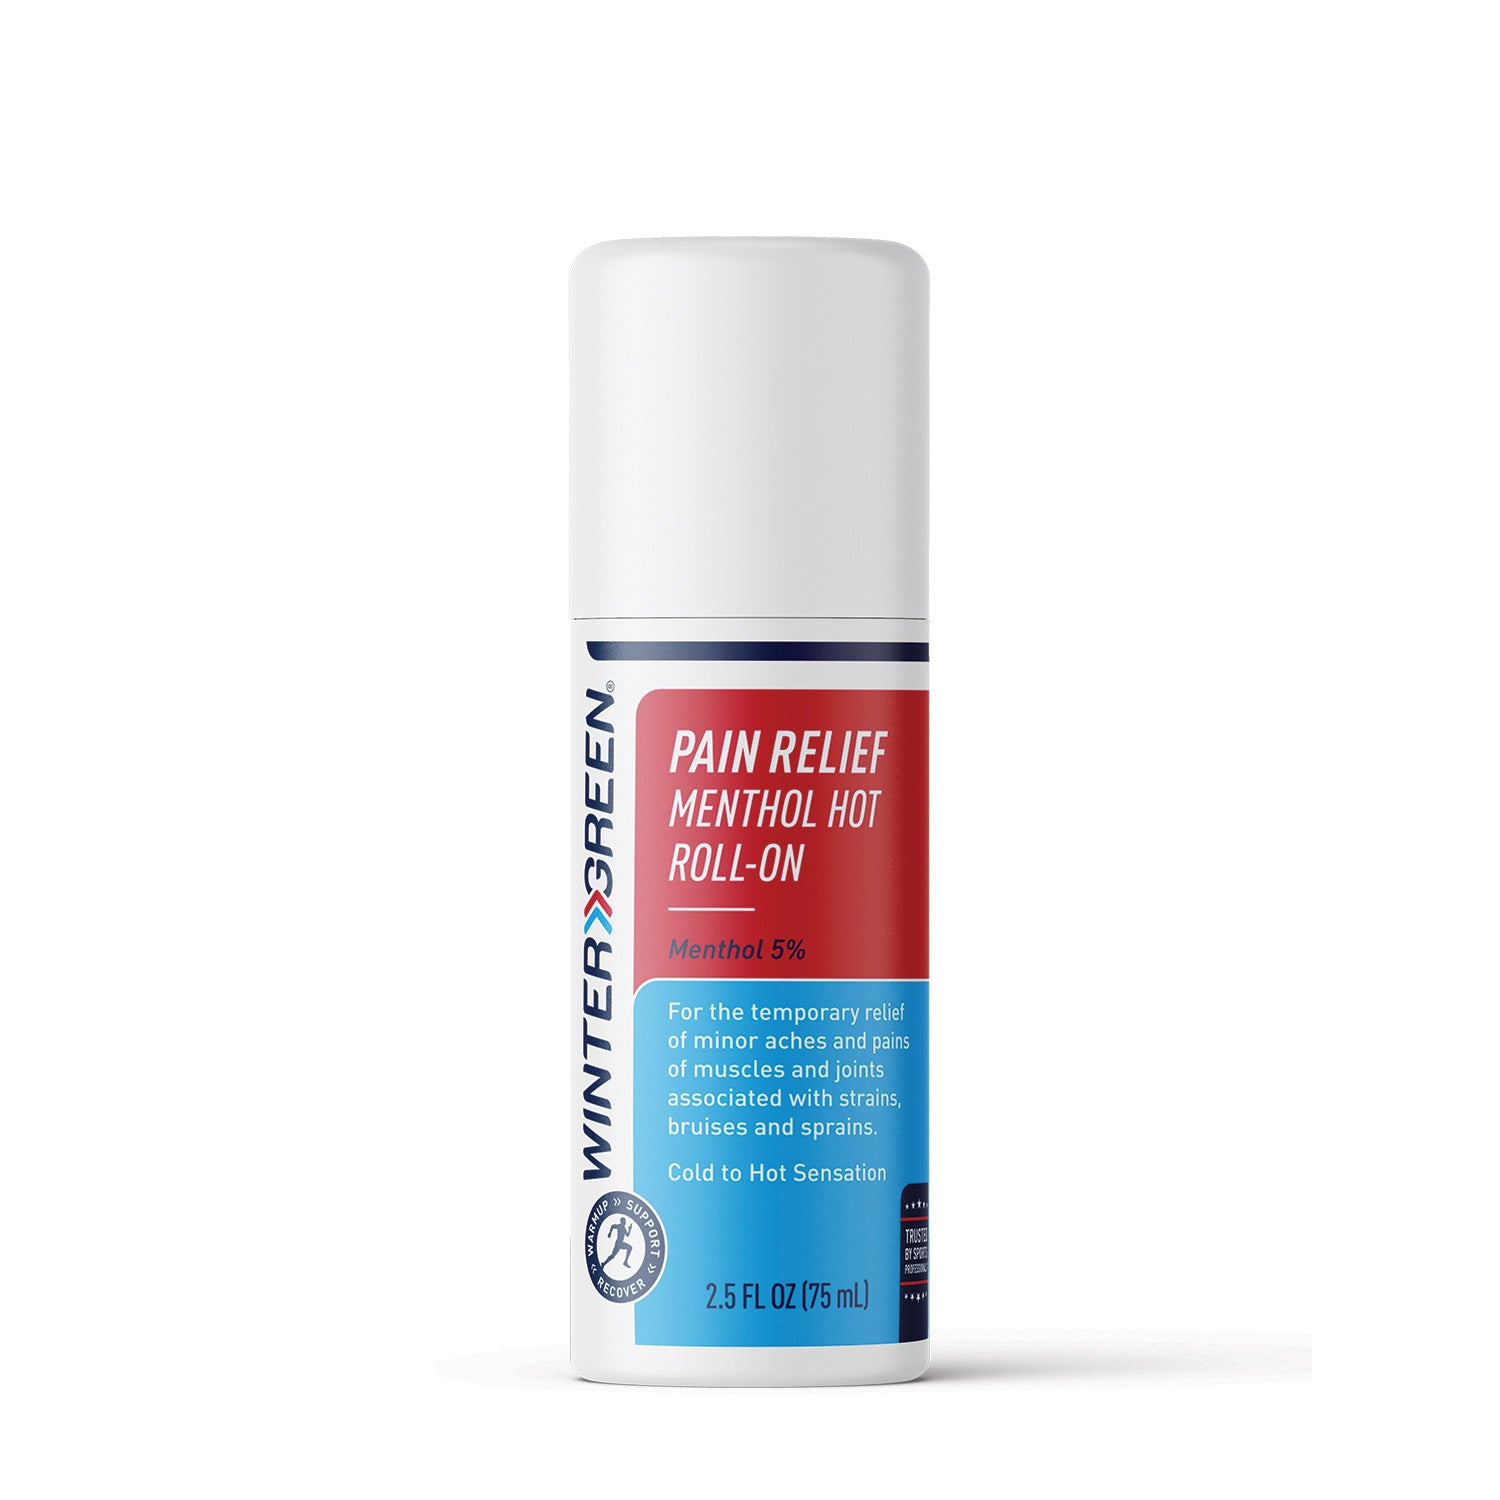 Pain Relief Menthol Hot Gel Roll On